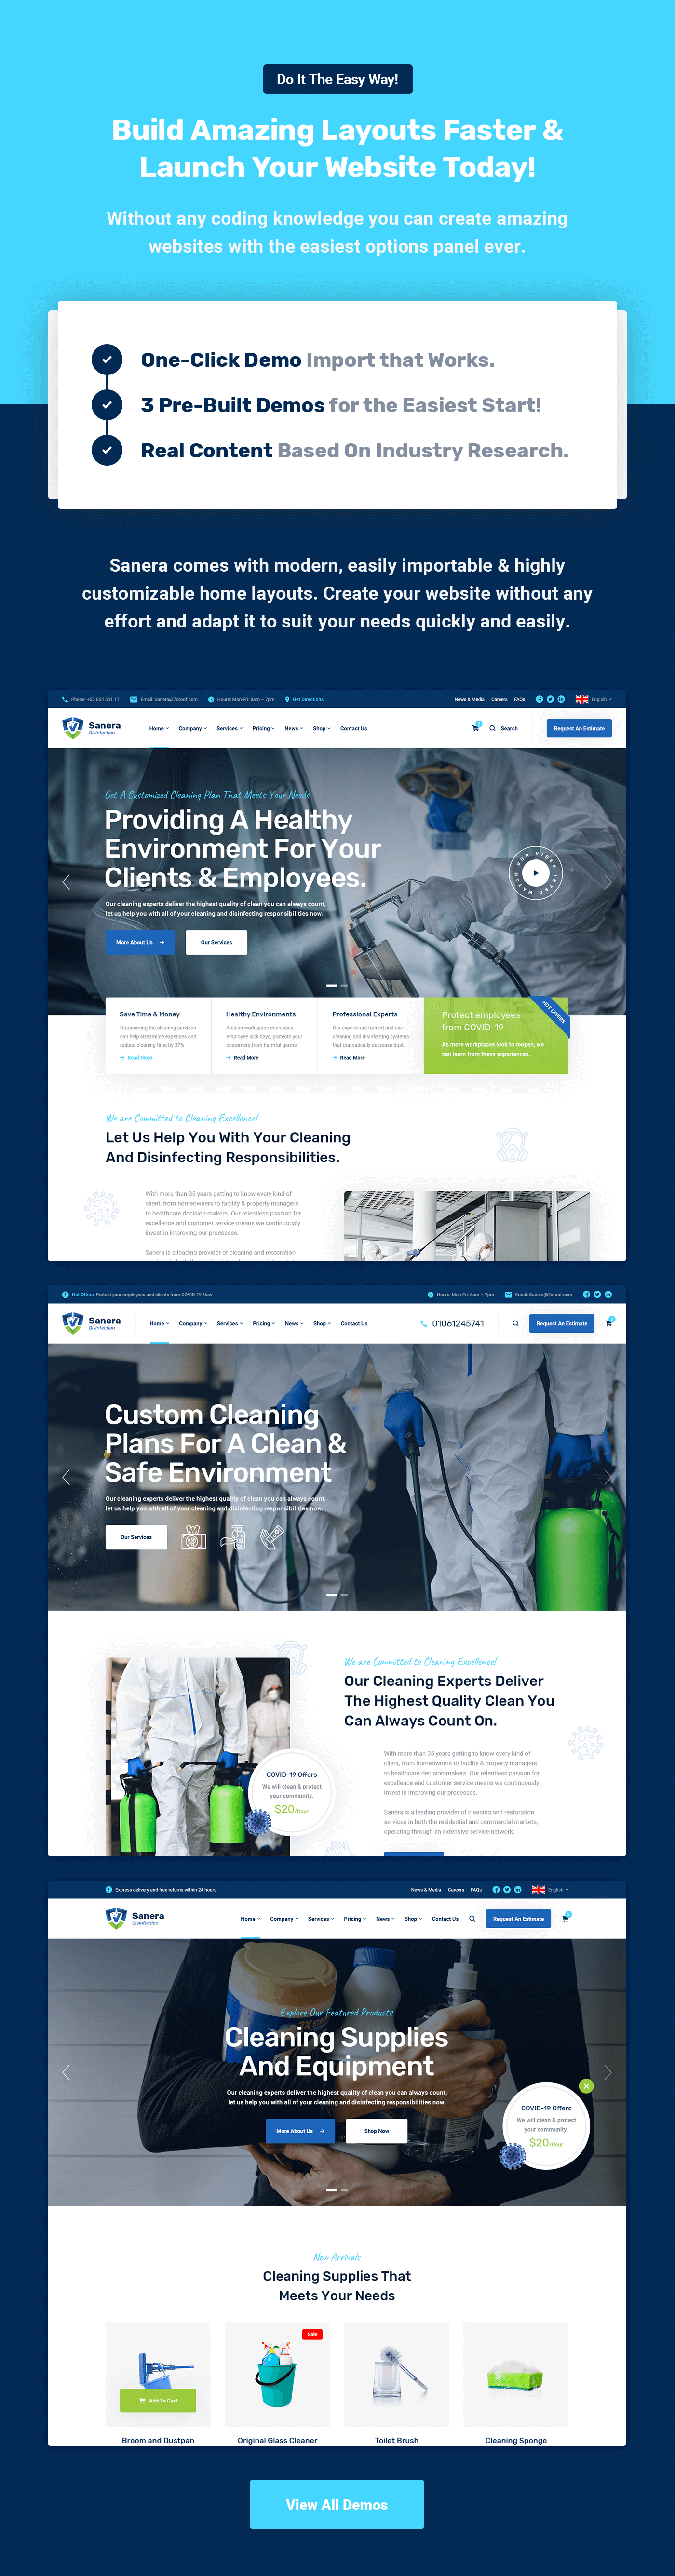 Sanera - Sanitizing And Cleaning Services WordPress Theme - 6